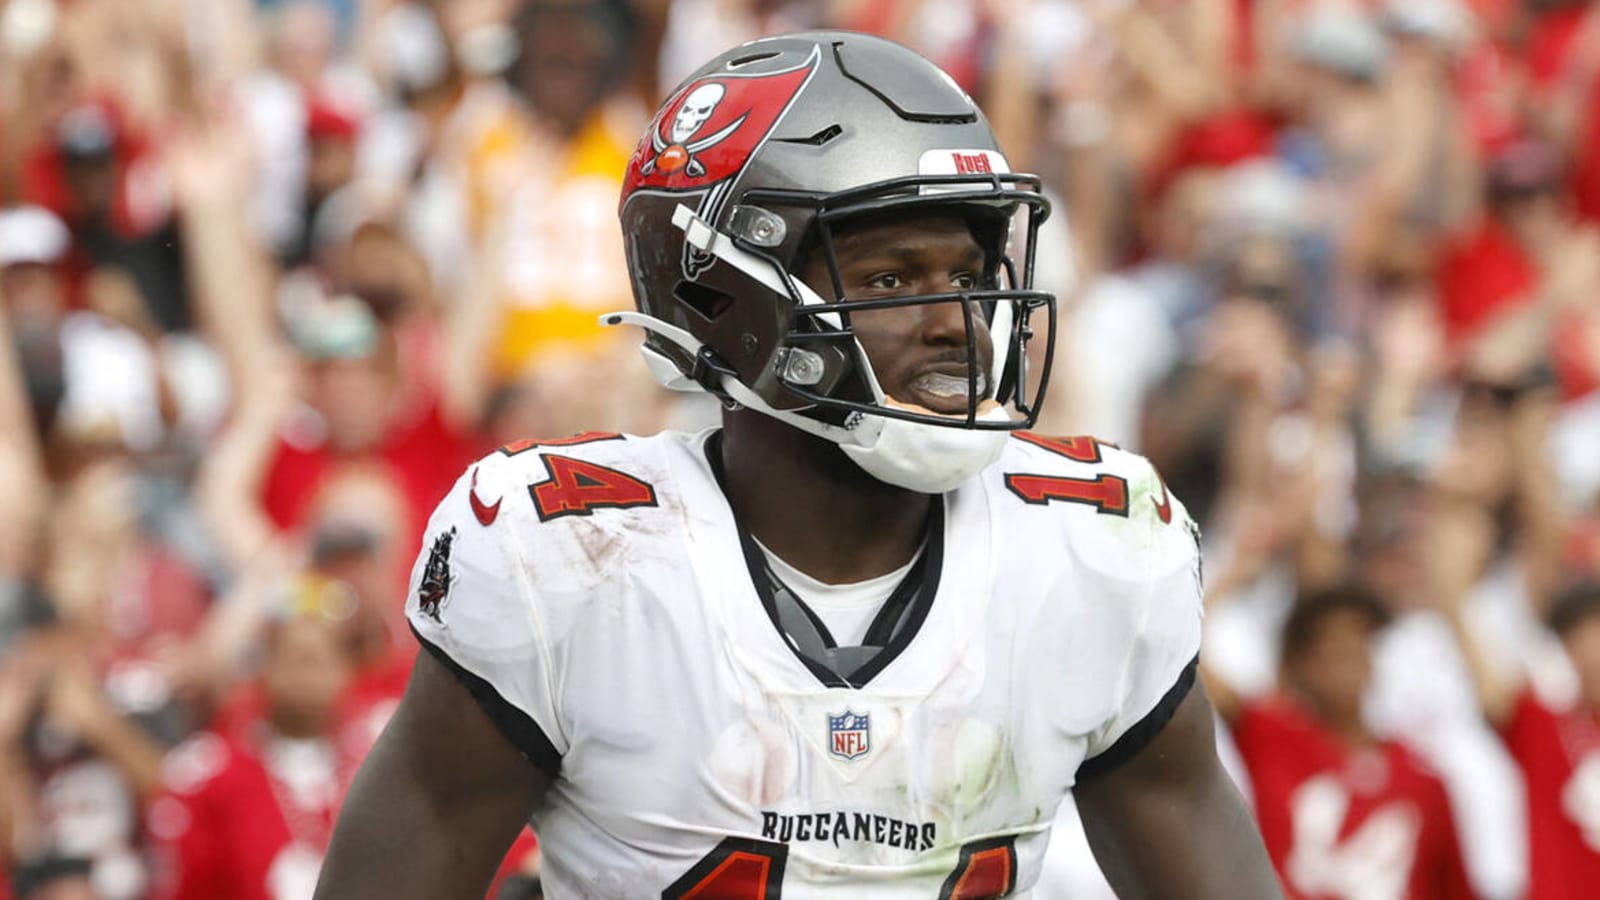 Report: Buccaneers could use franchise tag on WR Chris Godwin again